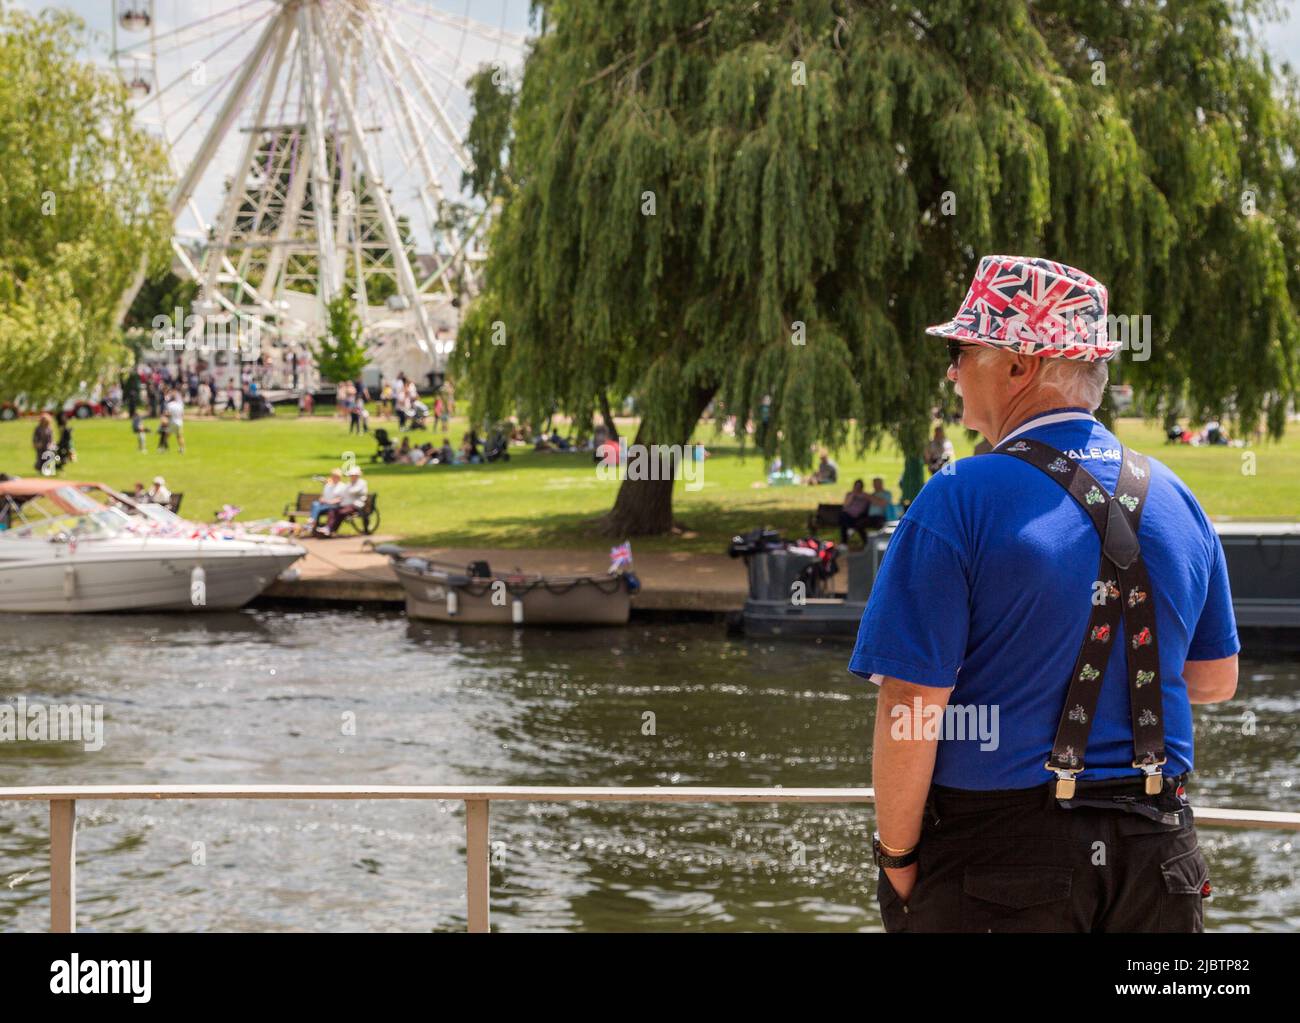 A man in a Union Flag hat looks across a river to people relaxing and  enjoying the sun in a park. British holiday, tourism or travel concept. Stock Photo